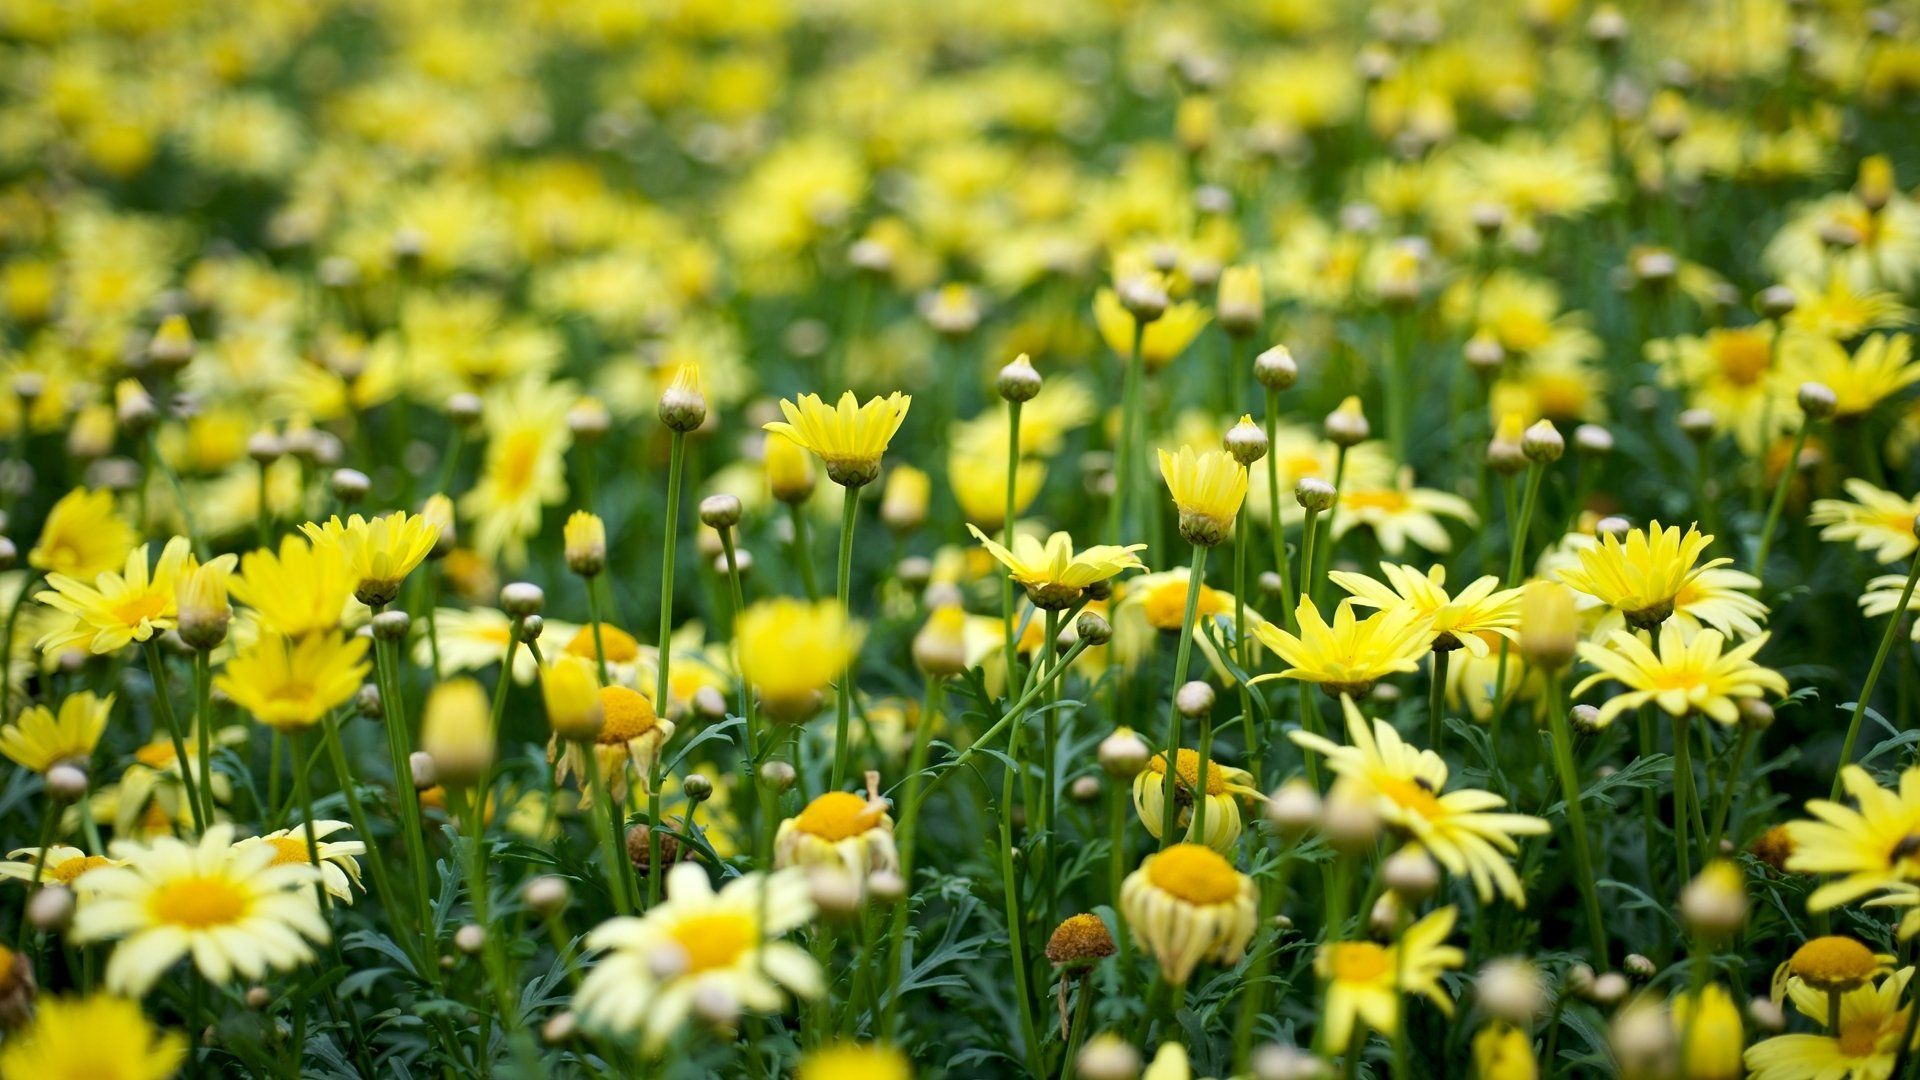 A field of yellow flowers with some green stems. - Light yellow